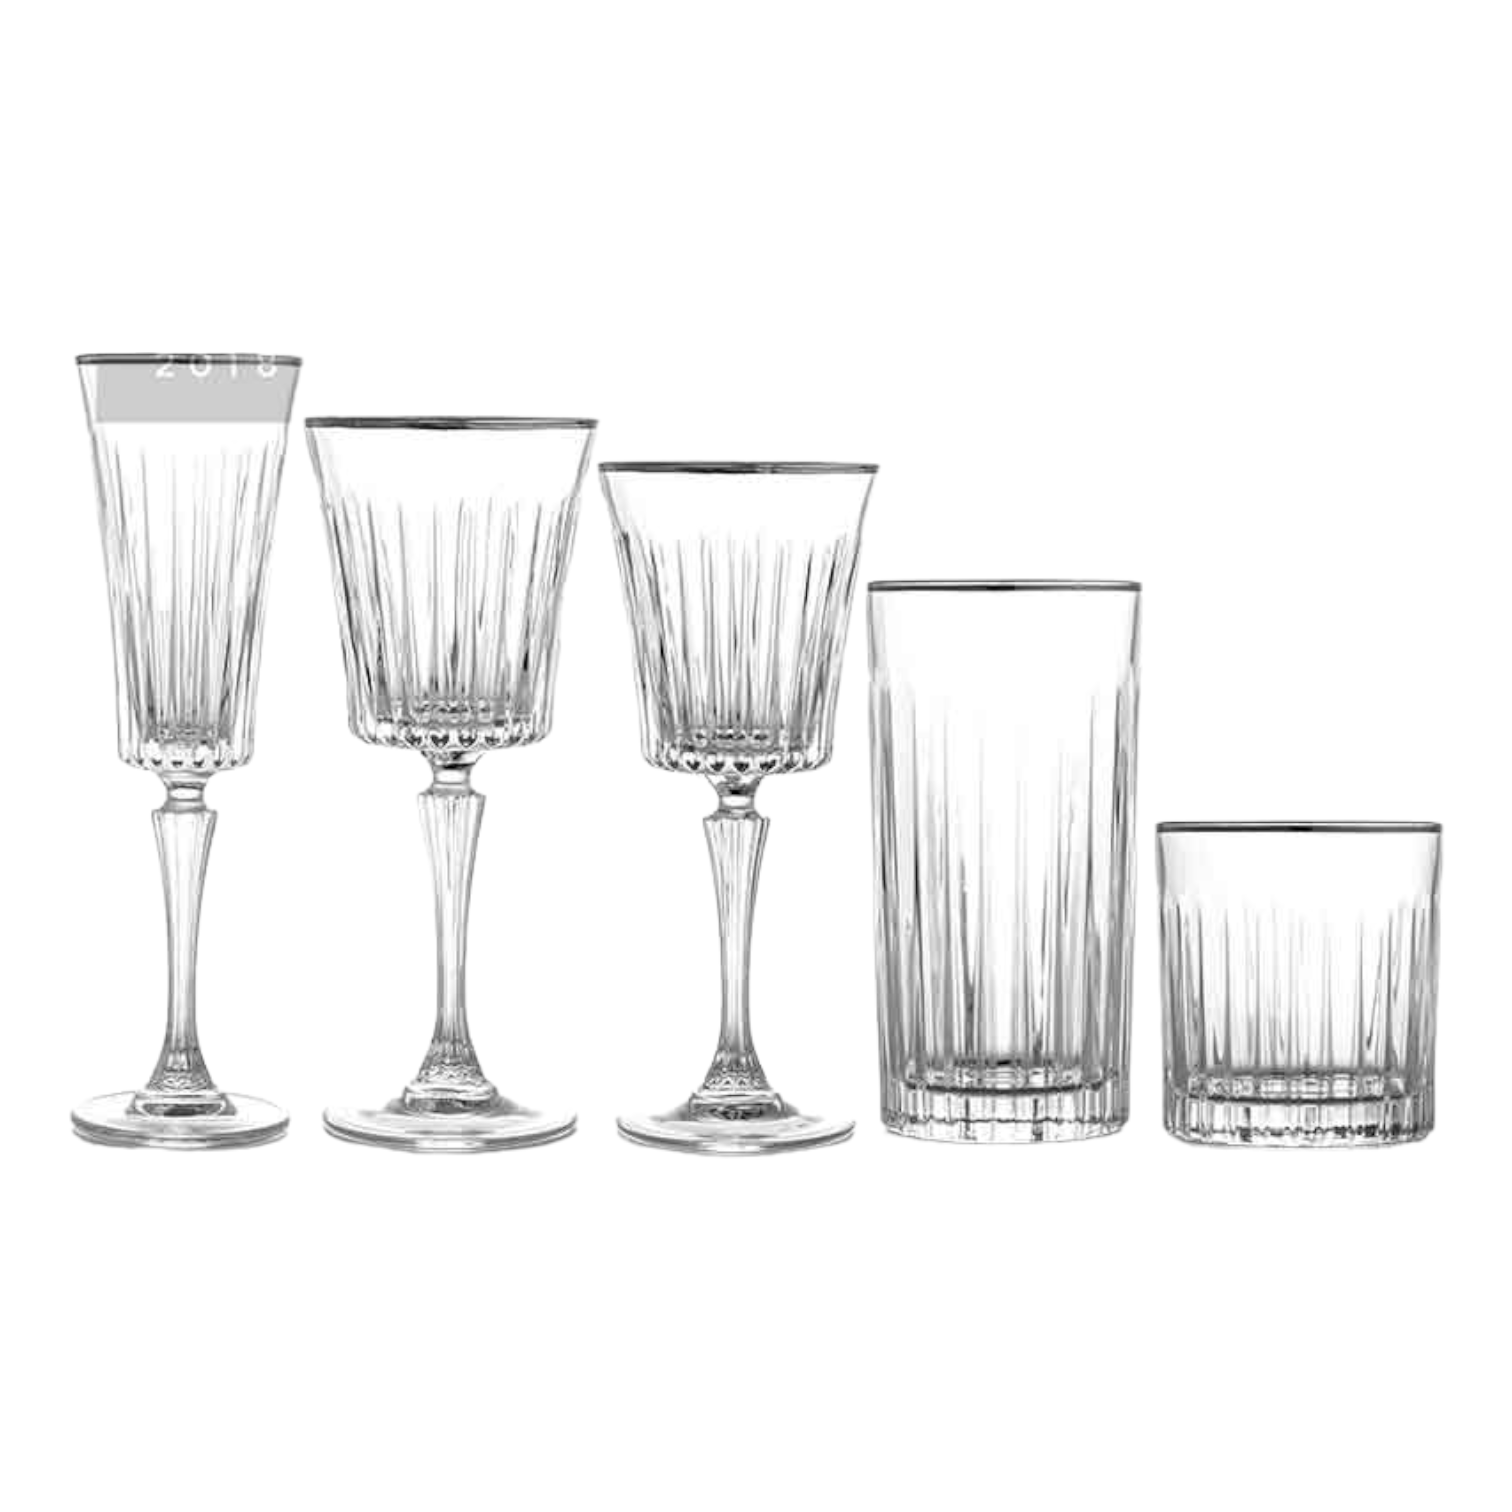 timeless band glassware rentals